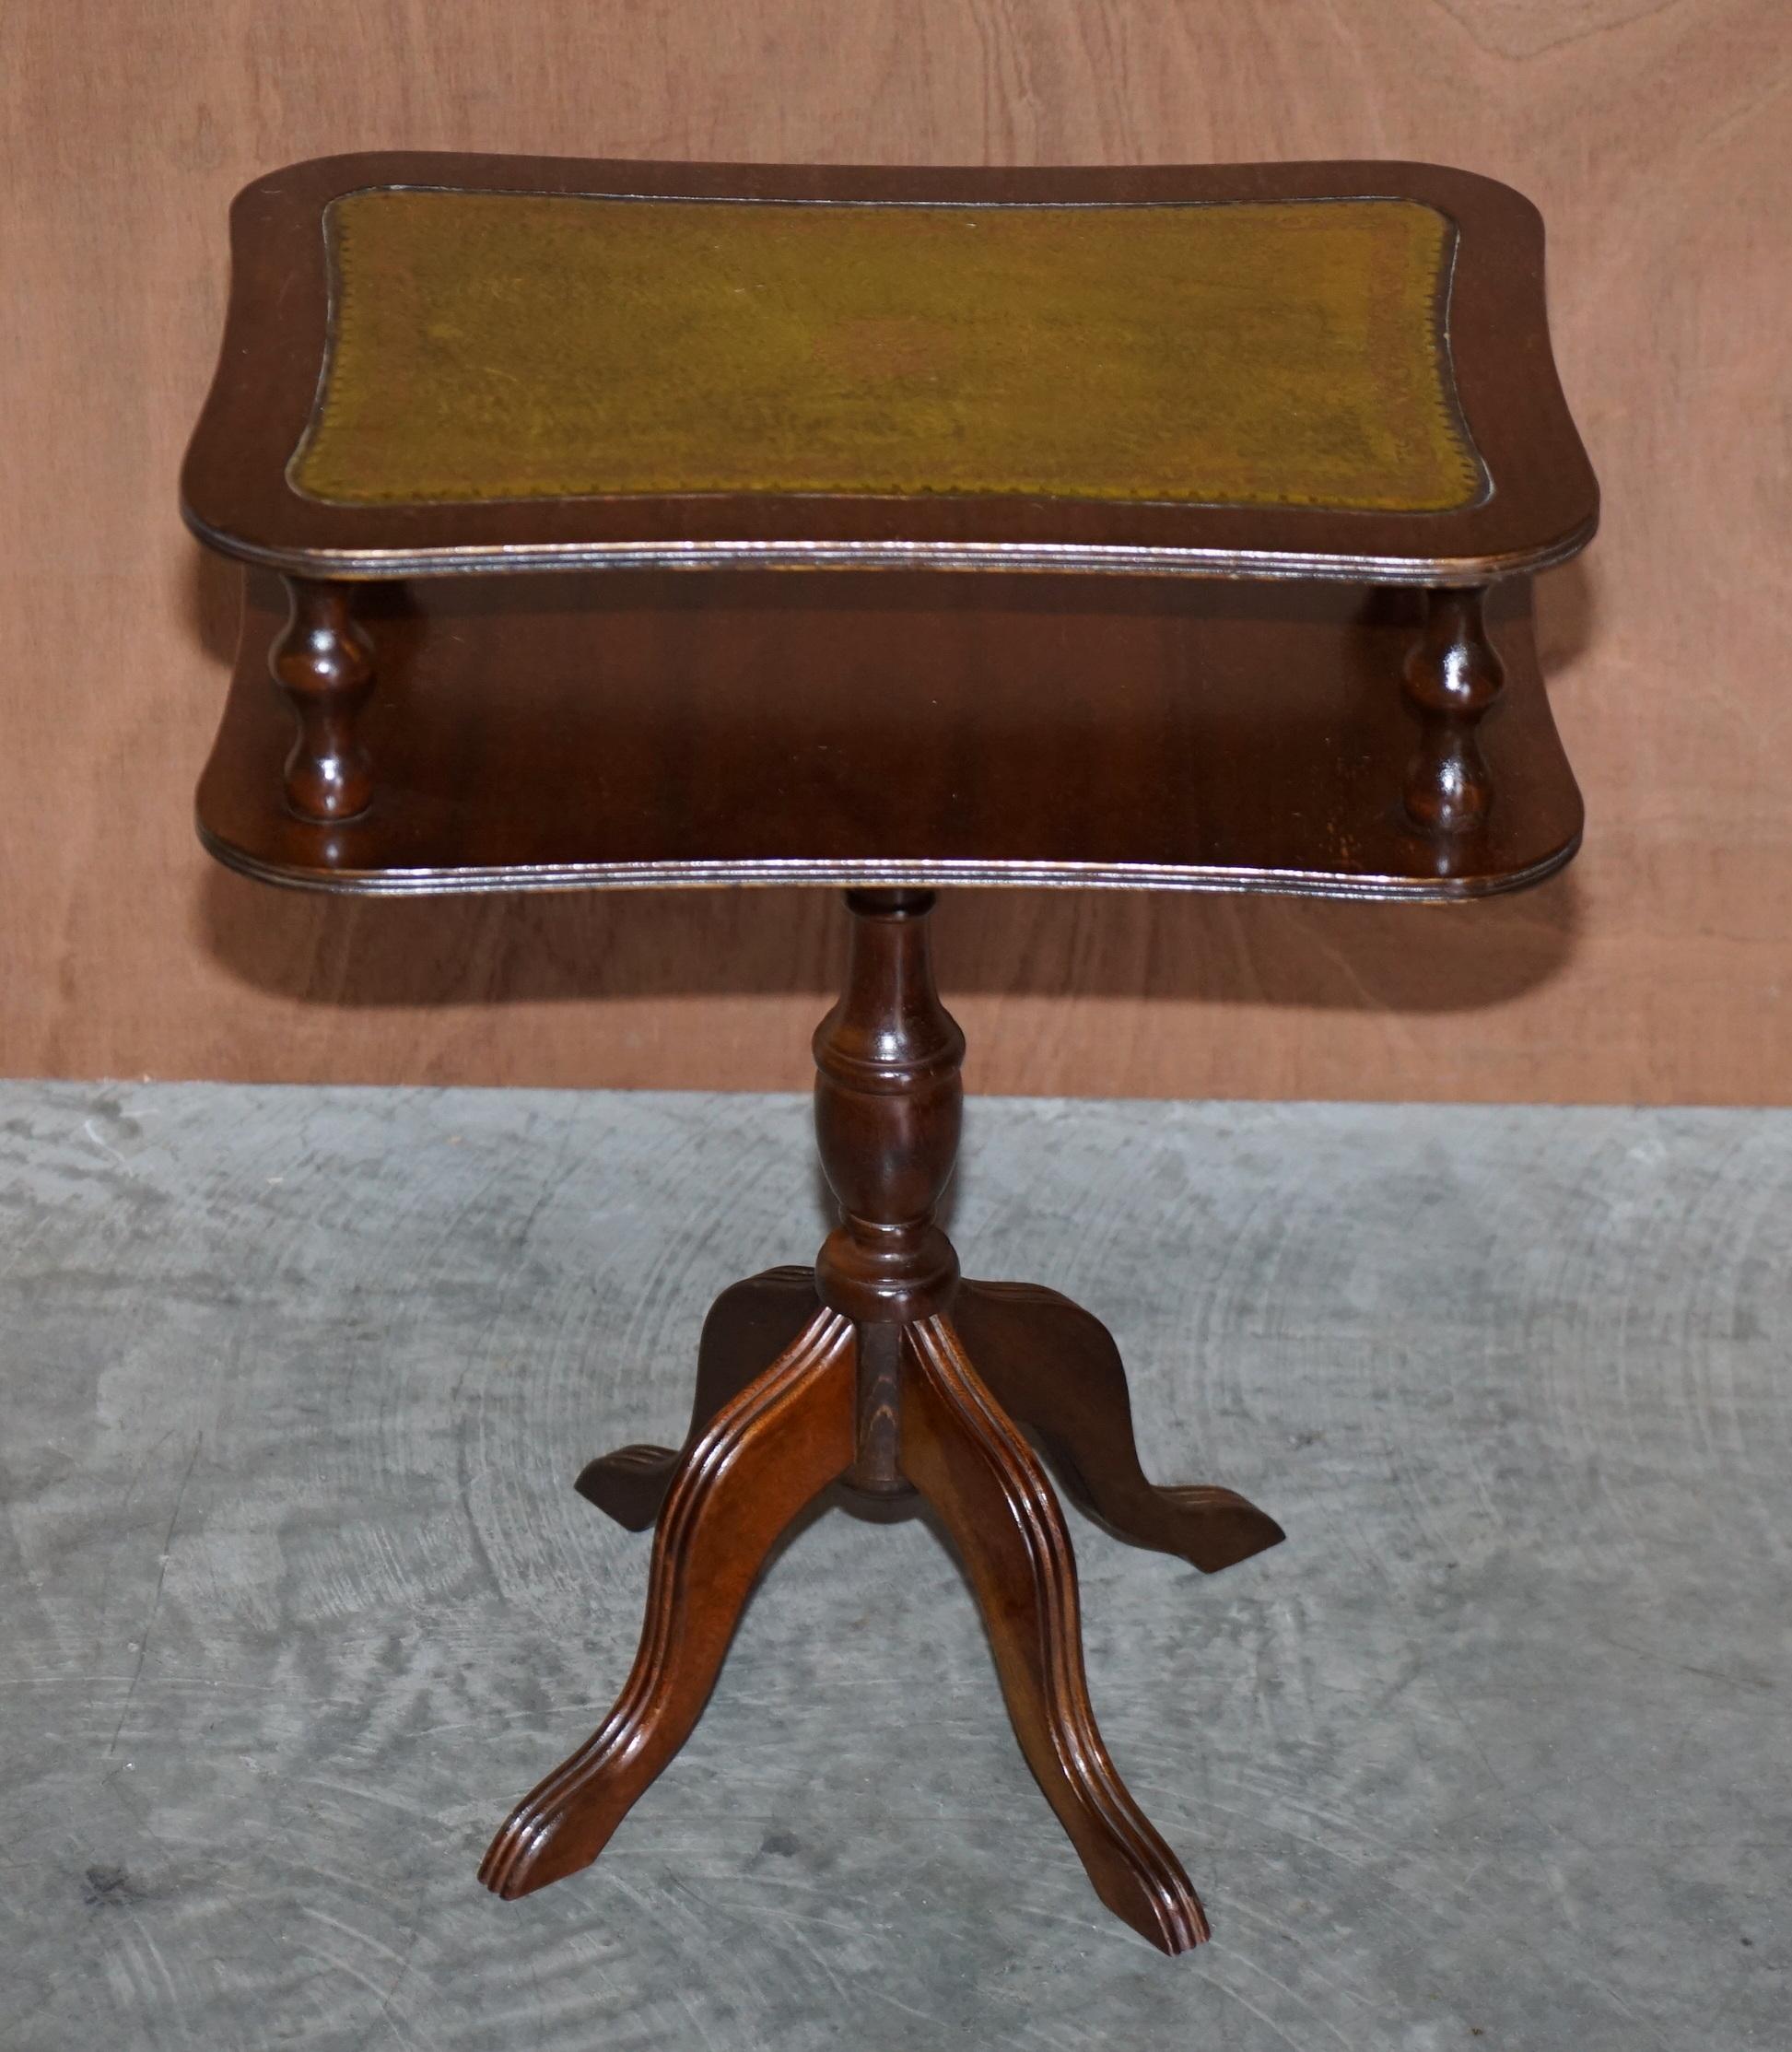 We are delighted to offer for sale this very nice vintage mahogany & green leather topped tripod table which is designed to house magazines and newspapers 

A good looking and well made piece, ideally suited for a lamp or glass of wine with a